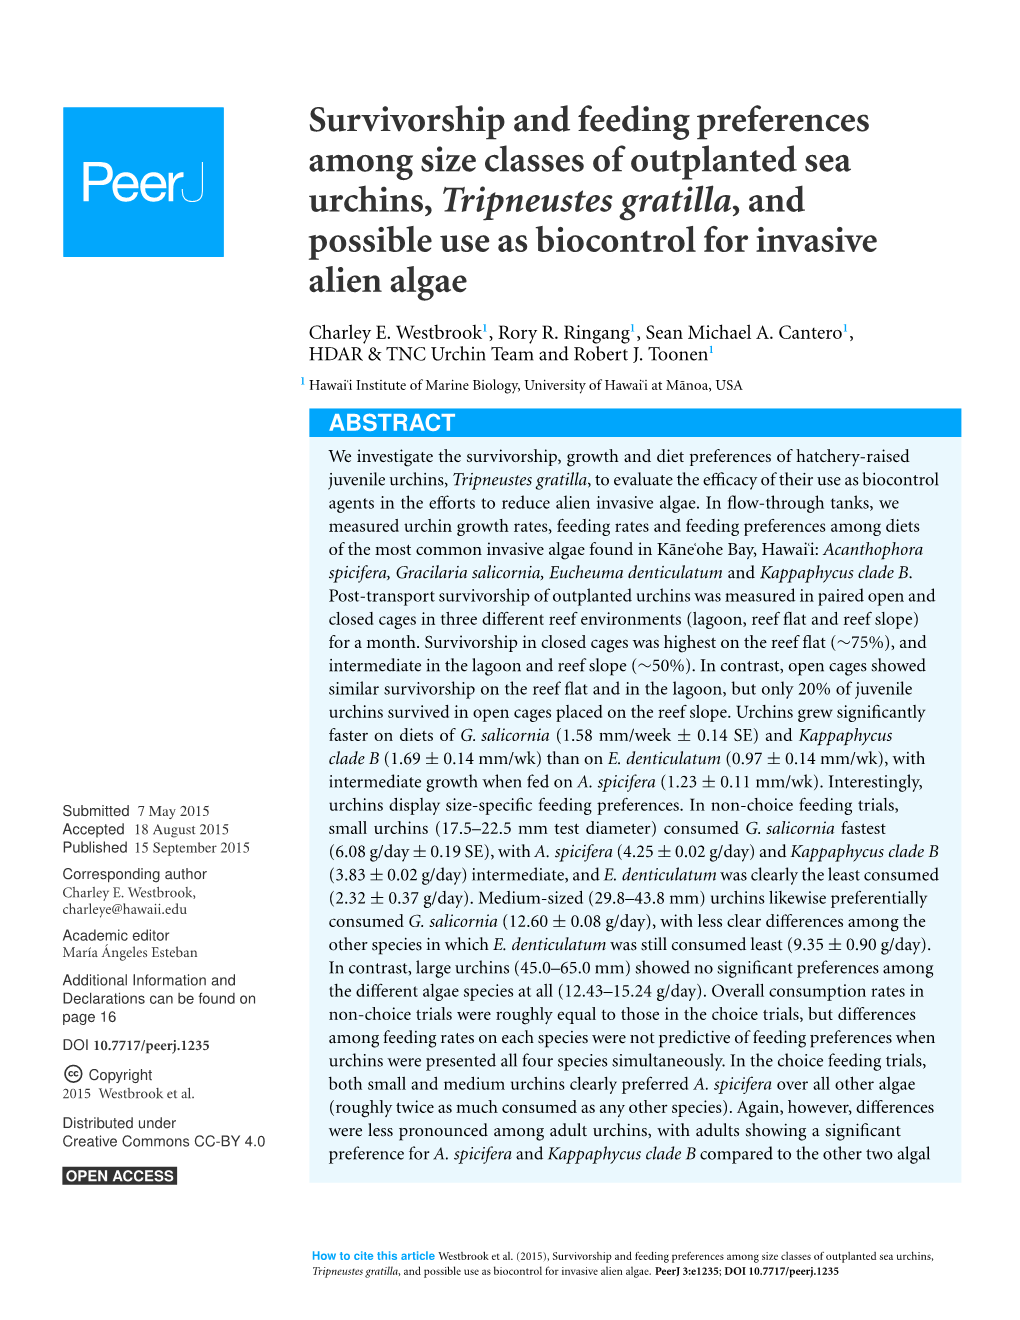 Survivorship and Feeding Preferences Among Size Classes of Outplanted Sea Urchins, Tripneustes Gratilla, and Possible Use As Biocontrol for Invasive Alien Algae